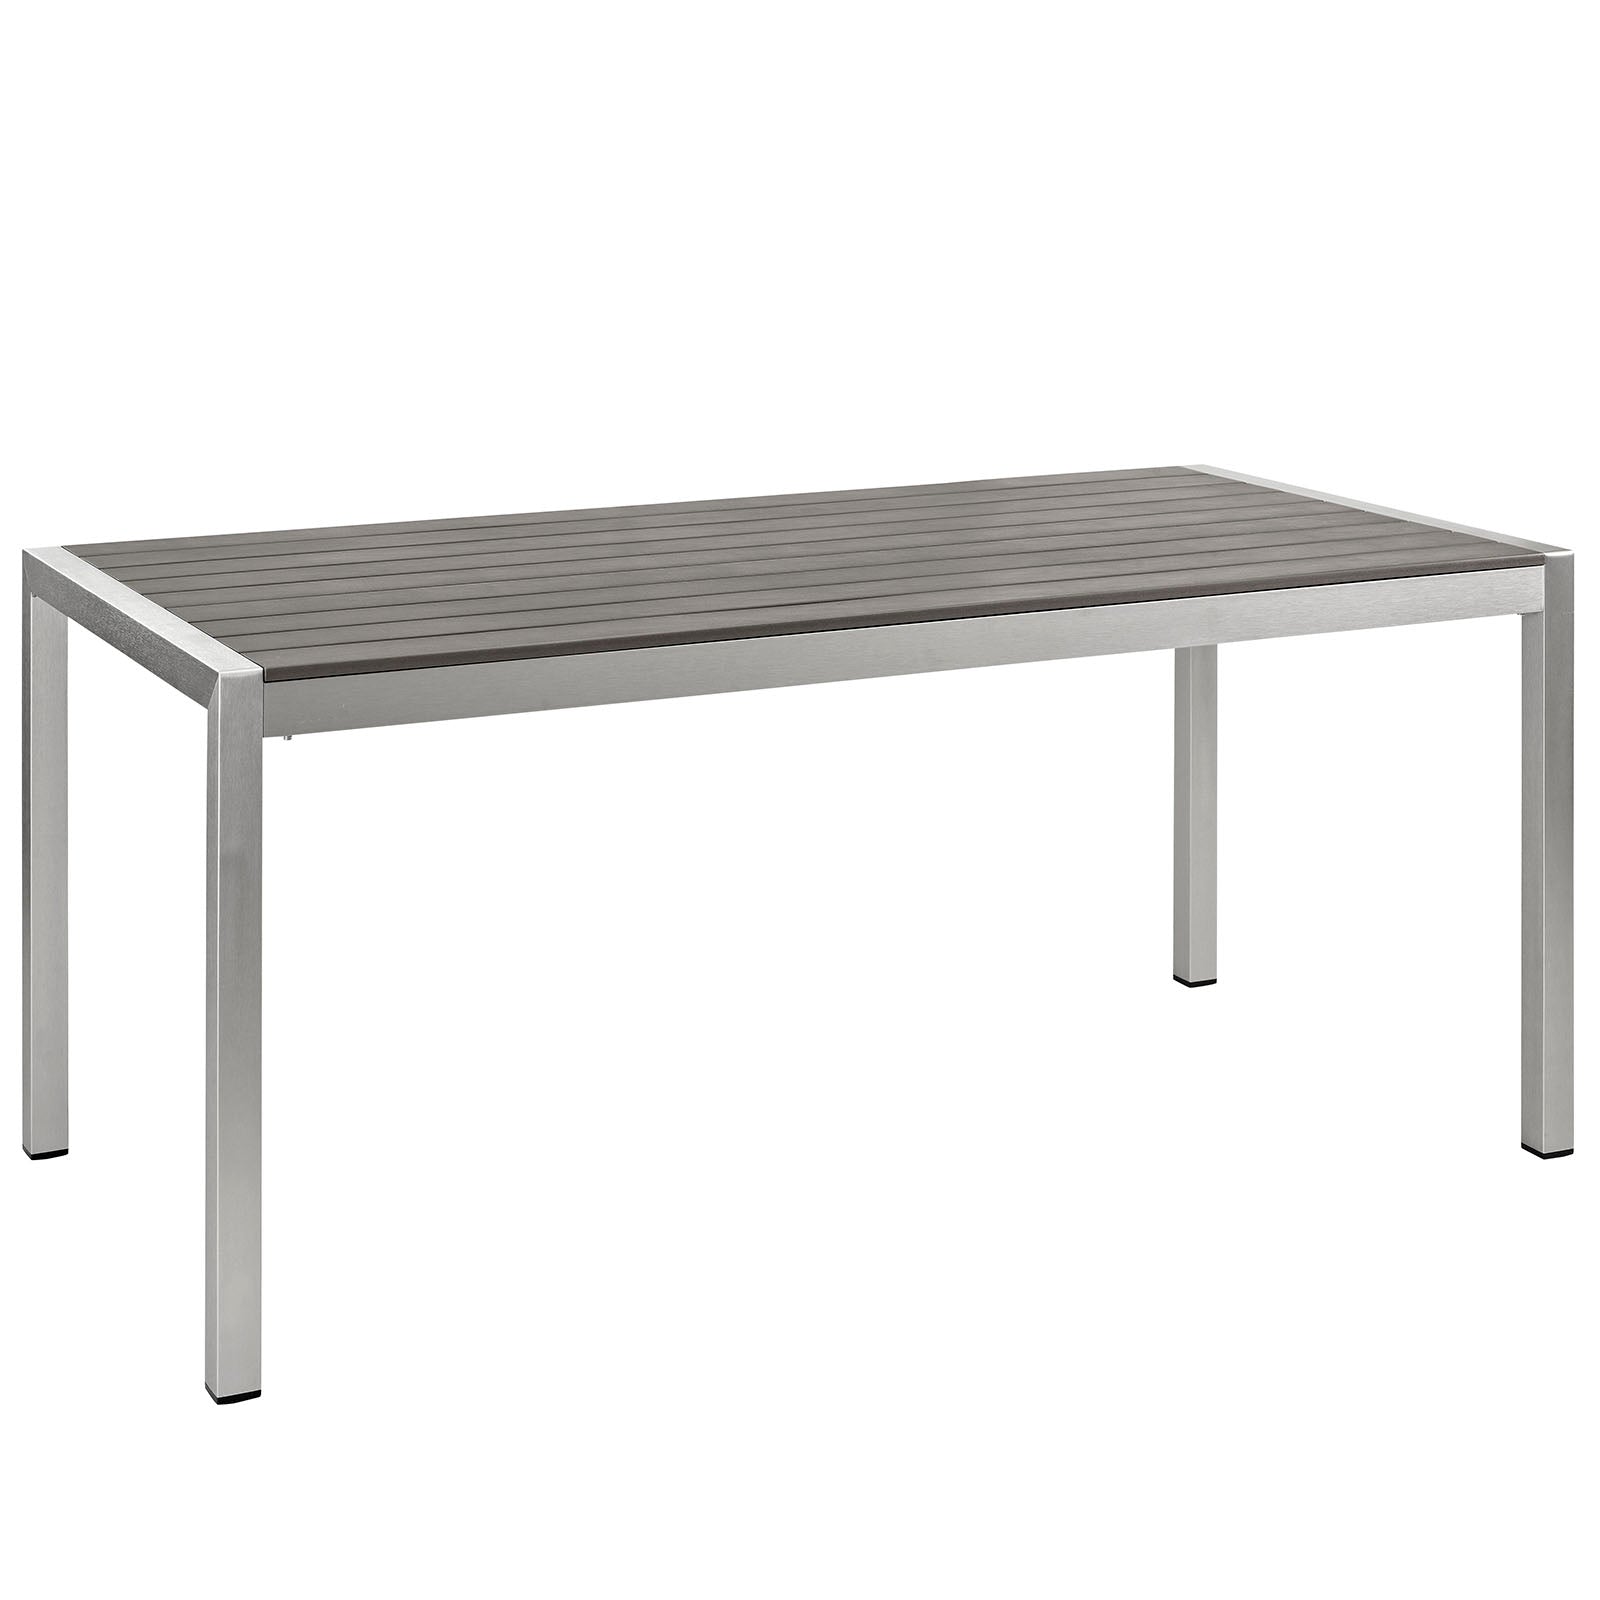 Shore Outdoor Patio Aluminum Dining Table - East Shore Modern Home Furnishings